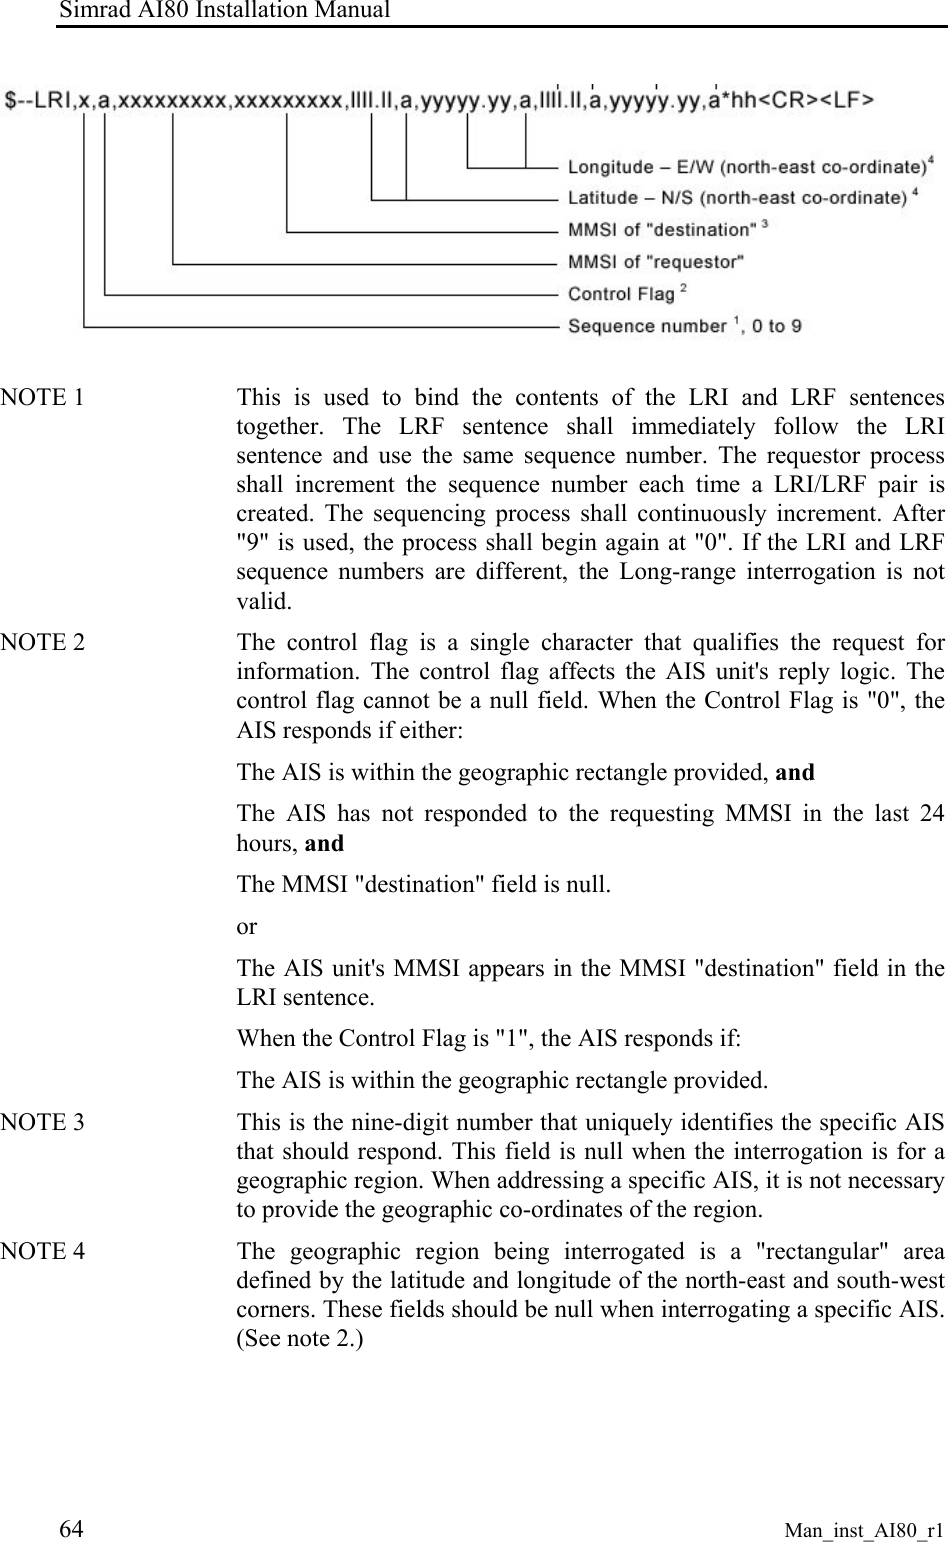 Simrad AI80 Installation Manual 64 Man_inst_AI80_r1  NOTE 1   This is used to bind the contents of the LRI and LRF sentences together. The LRF sentence shall immediately follow the LRI sentence and use the same sequence number. The requestor process shall increment the sequence number each time a LRI/LRF pair is created. The sequencing process shall continuously increment. After &quot;9&quot; is used, the process shall begin again at &quot;0&quot;. If the LRI and LRF sequence numbers are different, the Long-range interrogation is not valid. NOTE 2   The control flag is a single character that qualifies the request for information. The control flag affects the AIS unit&apos;s reply logic. The control flag cannot be a null field. When the Control Flag is &quot;0&quot;, the AIS responds if either: The AIS is within the geographic rectangle provided, and The AIS has not responded to the requesting MMSI in the last 24 hours, and The MMSI &quot;destination&quot; field is null. or The AIS unit&apos;s MMSI appears in the MMSI &quot;destination&quot; field in the LRI sentence. When the Control Flag is &quot;1&quot;, the AIS responds if: The AIS is within the geographic rectangle provided. NOTE 3   This is the nine-digit number that uniquely identifies the specific AIS that should respond. This field is null when the interrogation is for a geographic region. When addressing a specific AIS, it is not necessary to provide the geographic co-ordinates of the region. NOTE 4   The geographic region being interrogated is a &quot;rectangular&quot; area defined by the latitude and longitude of the north-east and south-west corners. These fields should be null when interrogating a specific AIS. (See note 2.) 